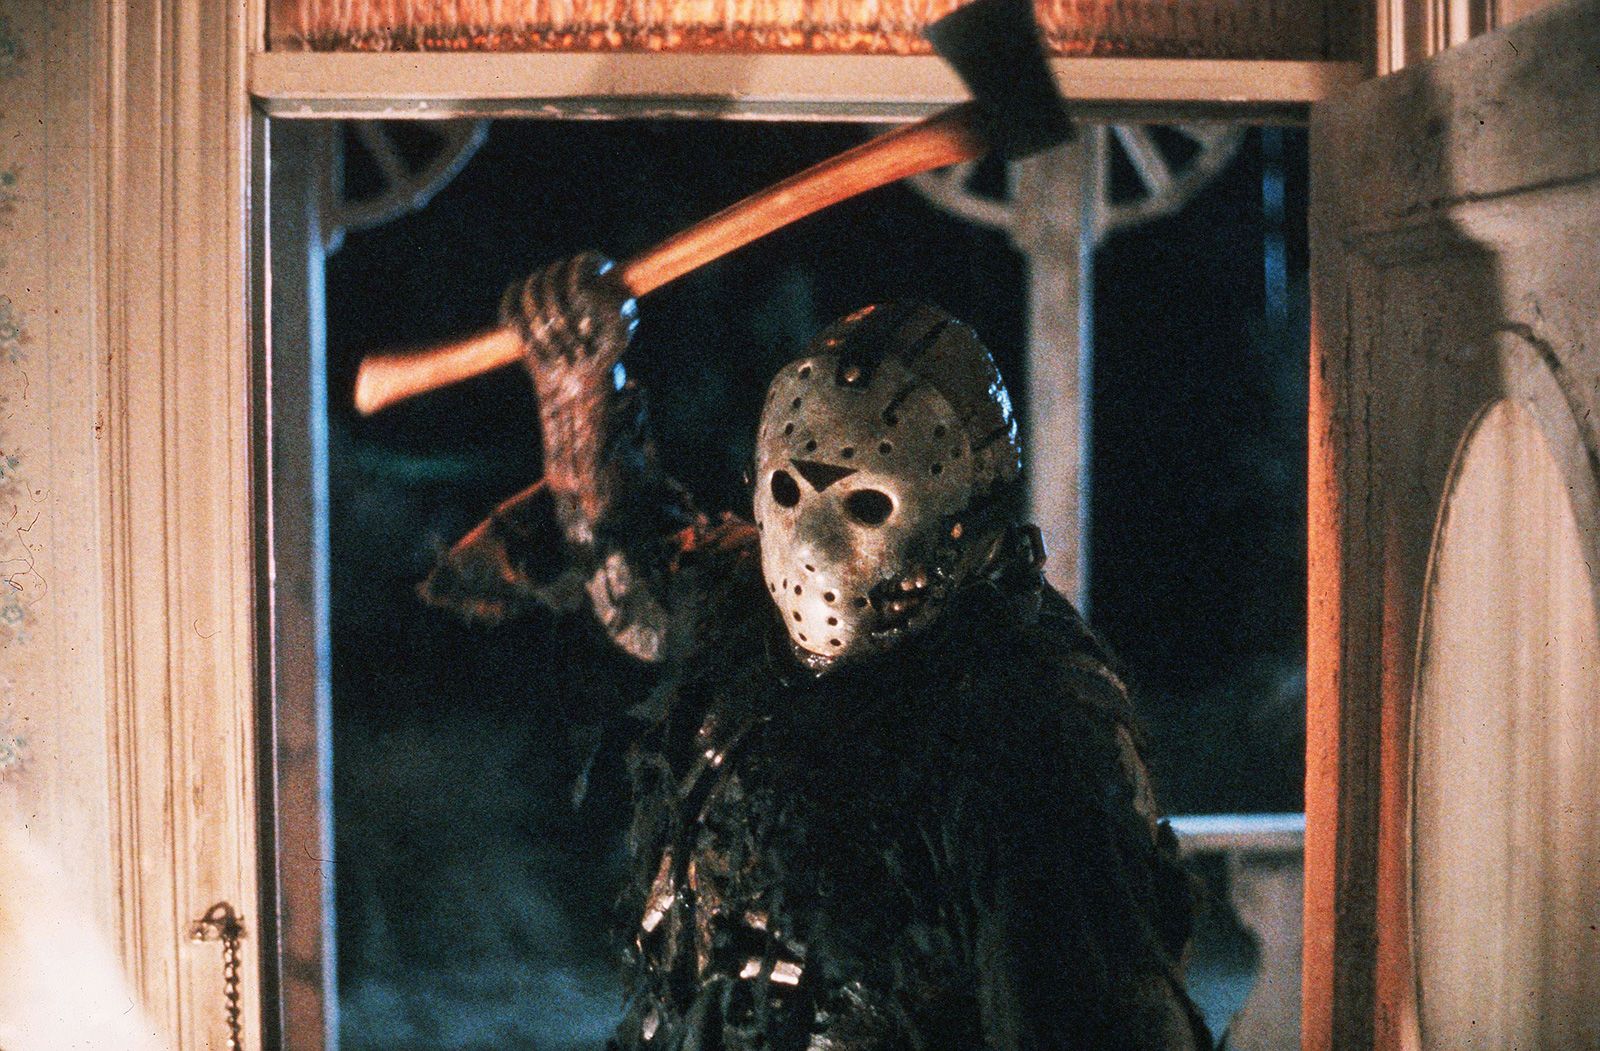 The Drinking Games: Friday the 13th (1980)